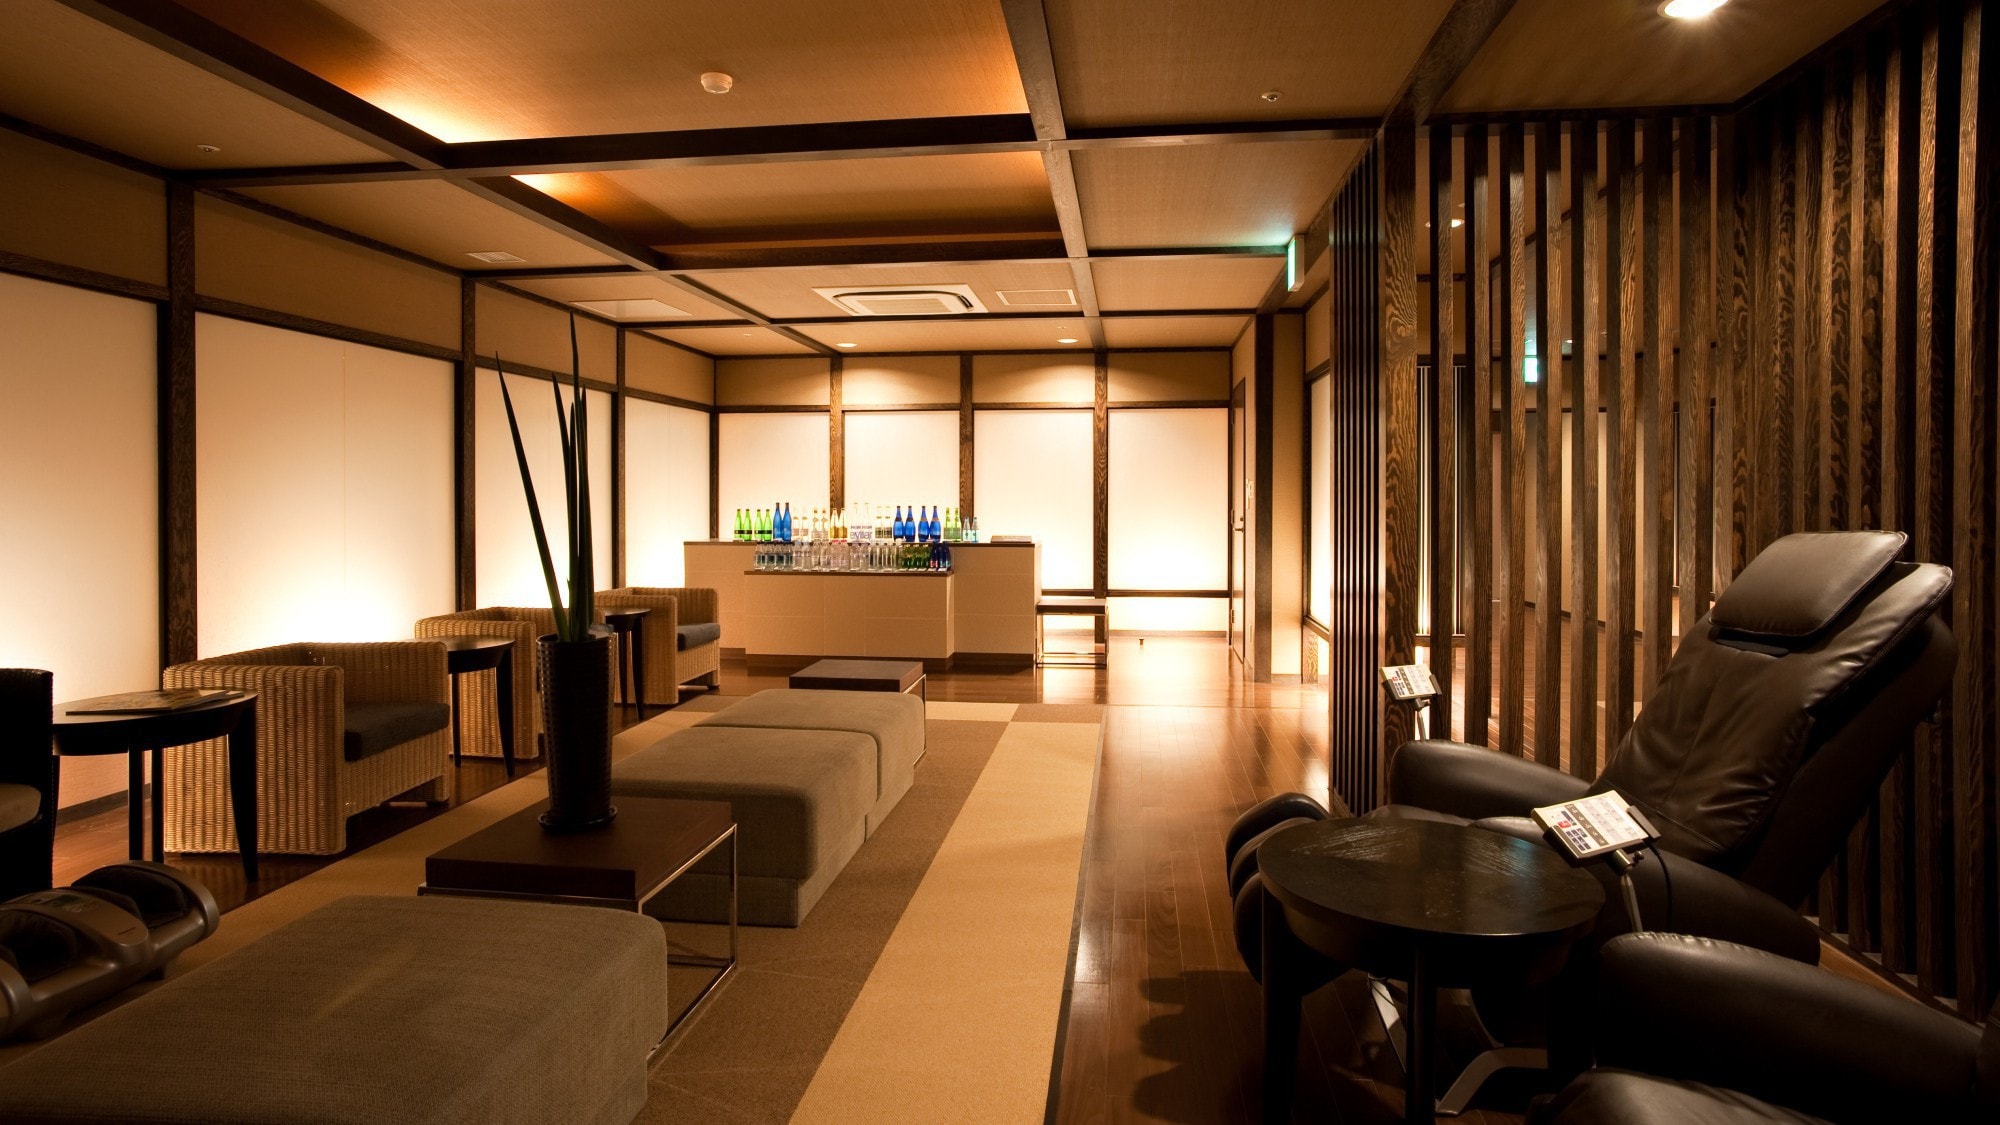 ◆ After bathing lounge / After bathing, take a break in the lounge with a massage chair.